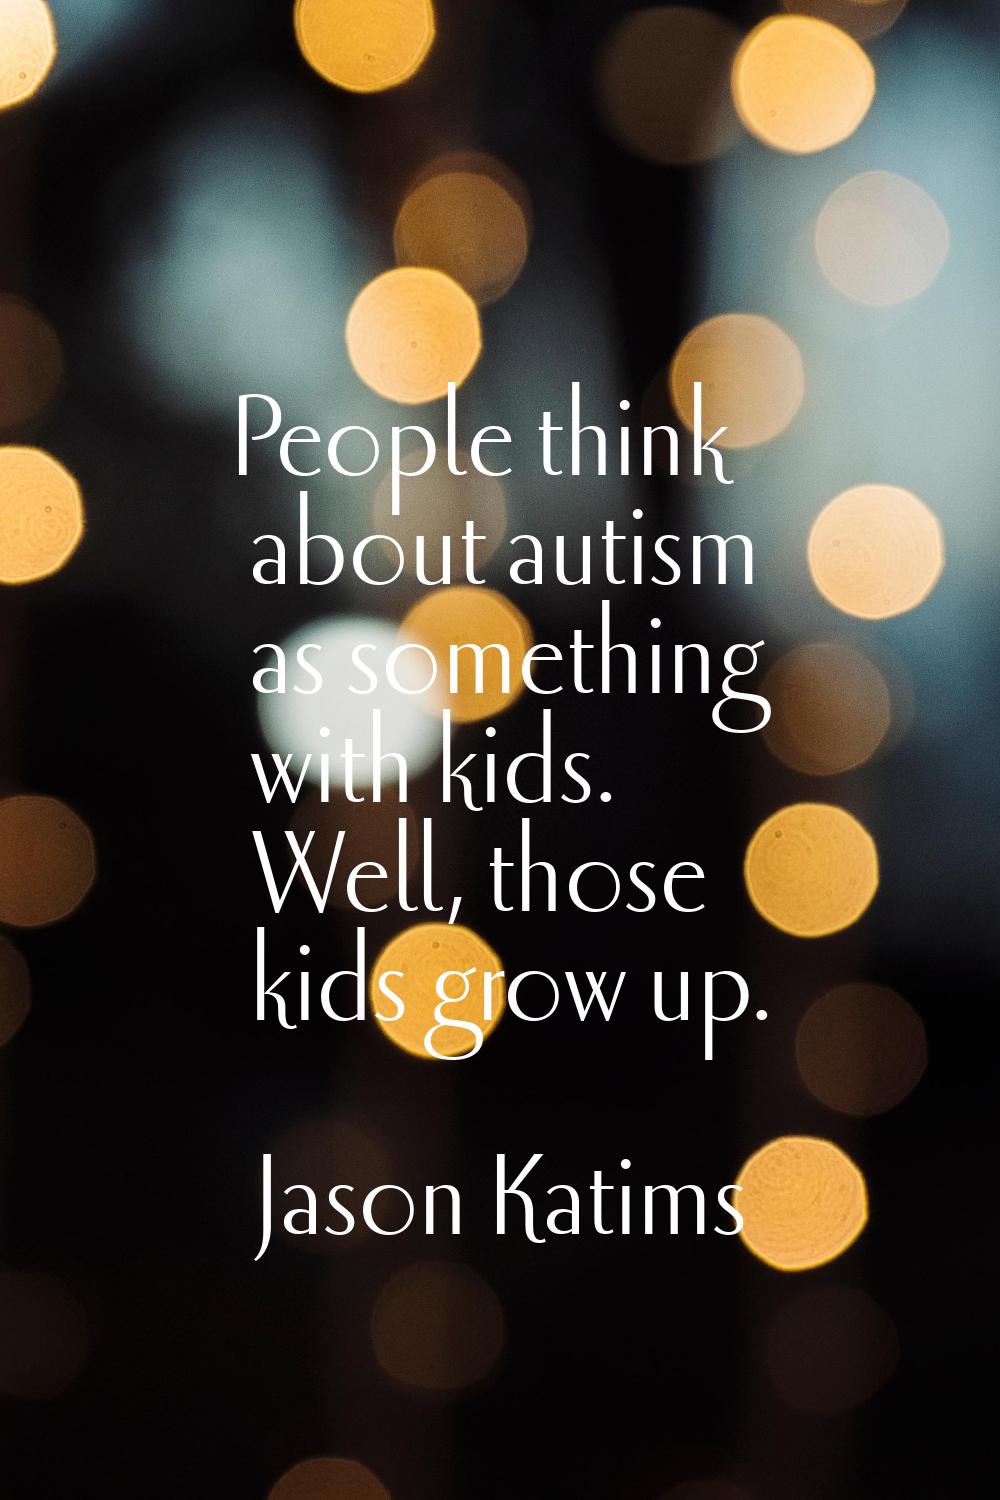 People think about autism as something with kids. Well, those kids grow up.